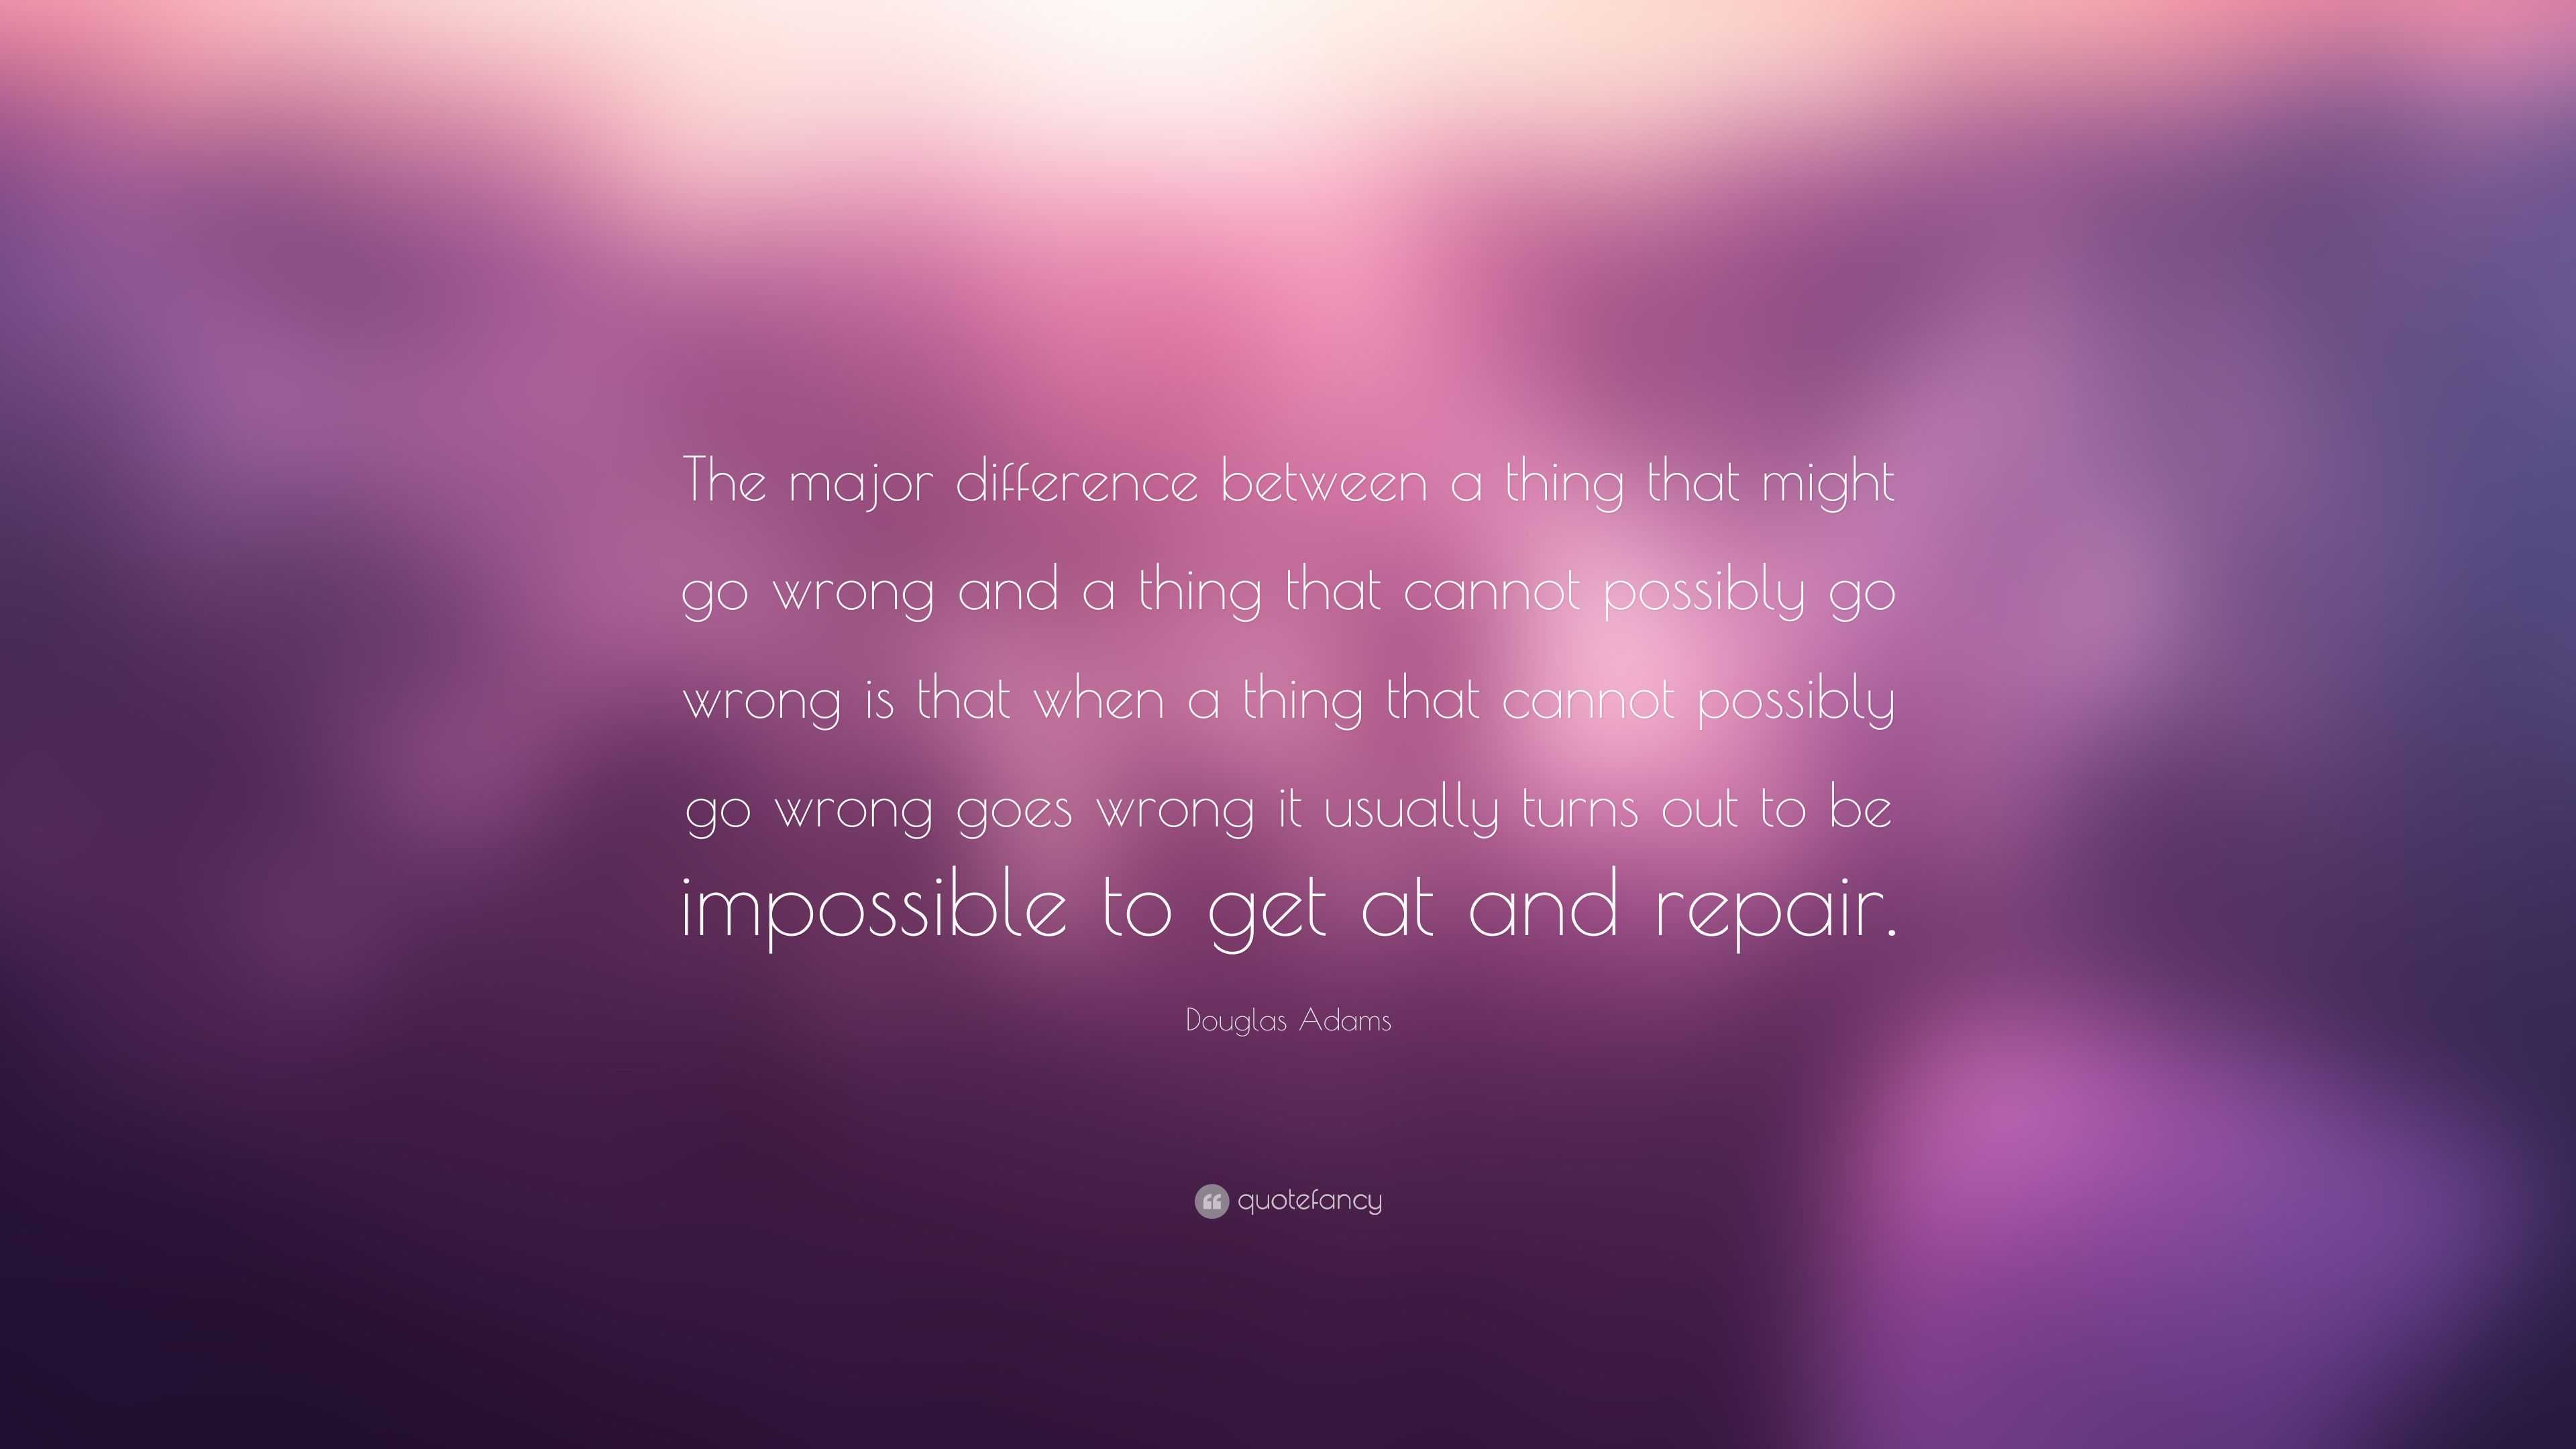 Douglas Adams Quote The Major Difference Between A Thing That Might Go Wrong And A Thing That Cannot Possibly Go Wrong Is That When A Thing 9 Wallpapers Quotefancy